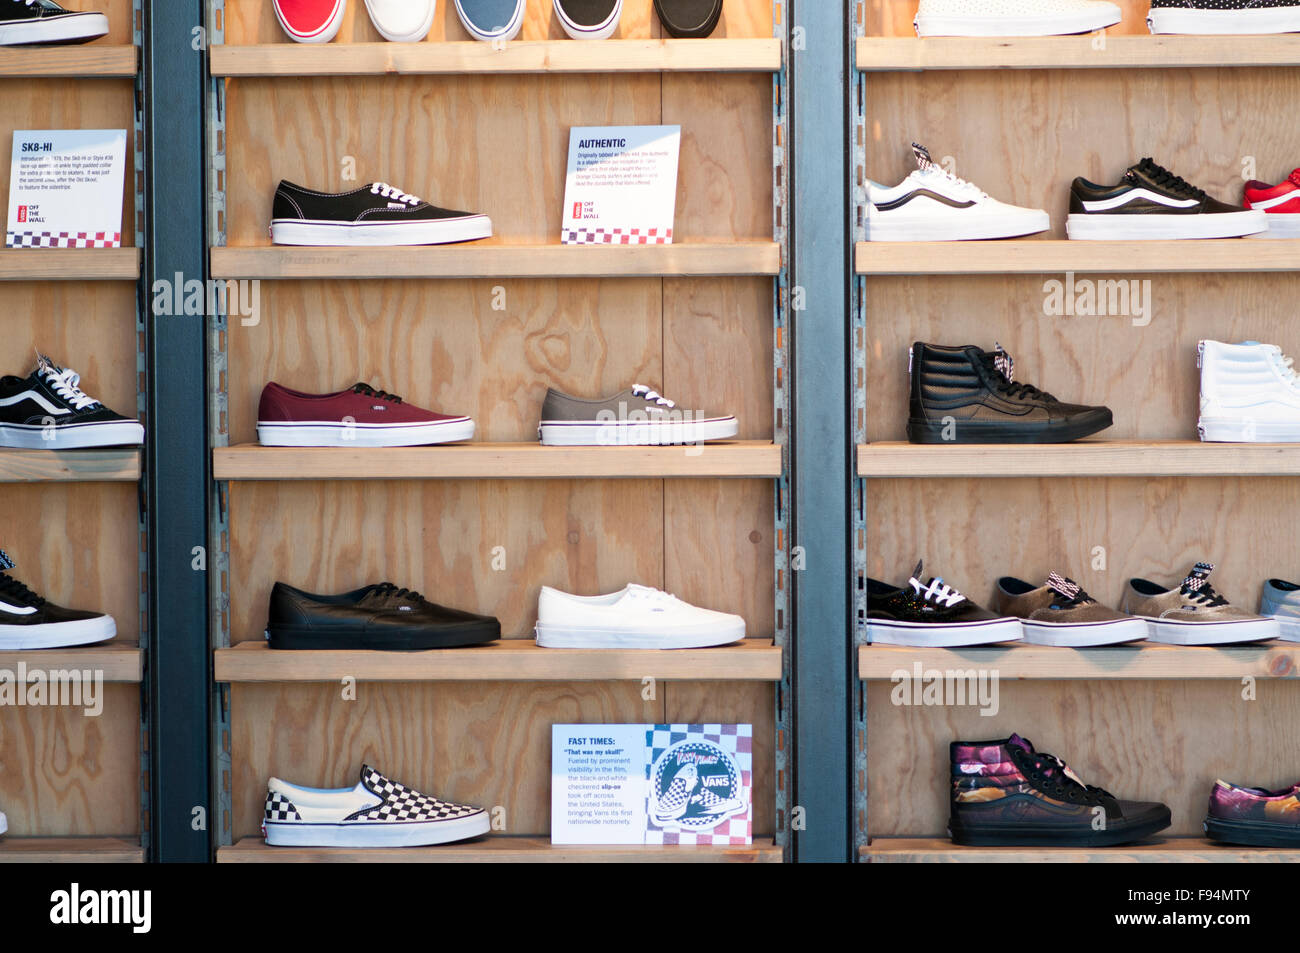 Vans Shoes High Resolution Stock 